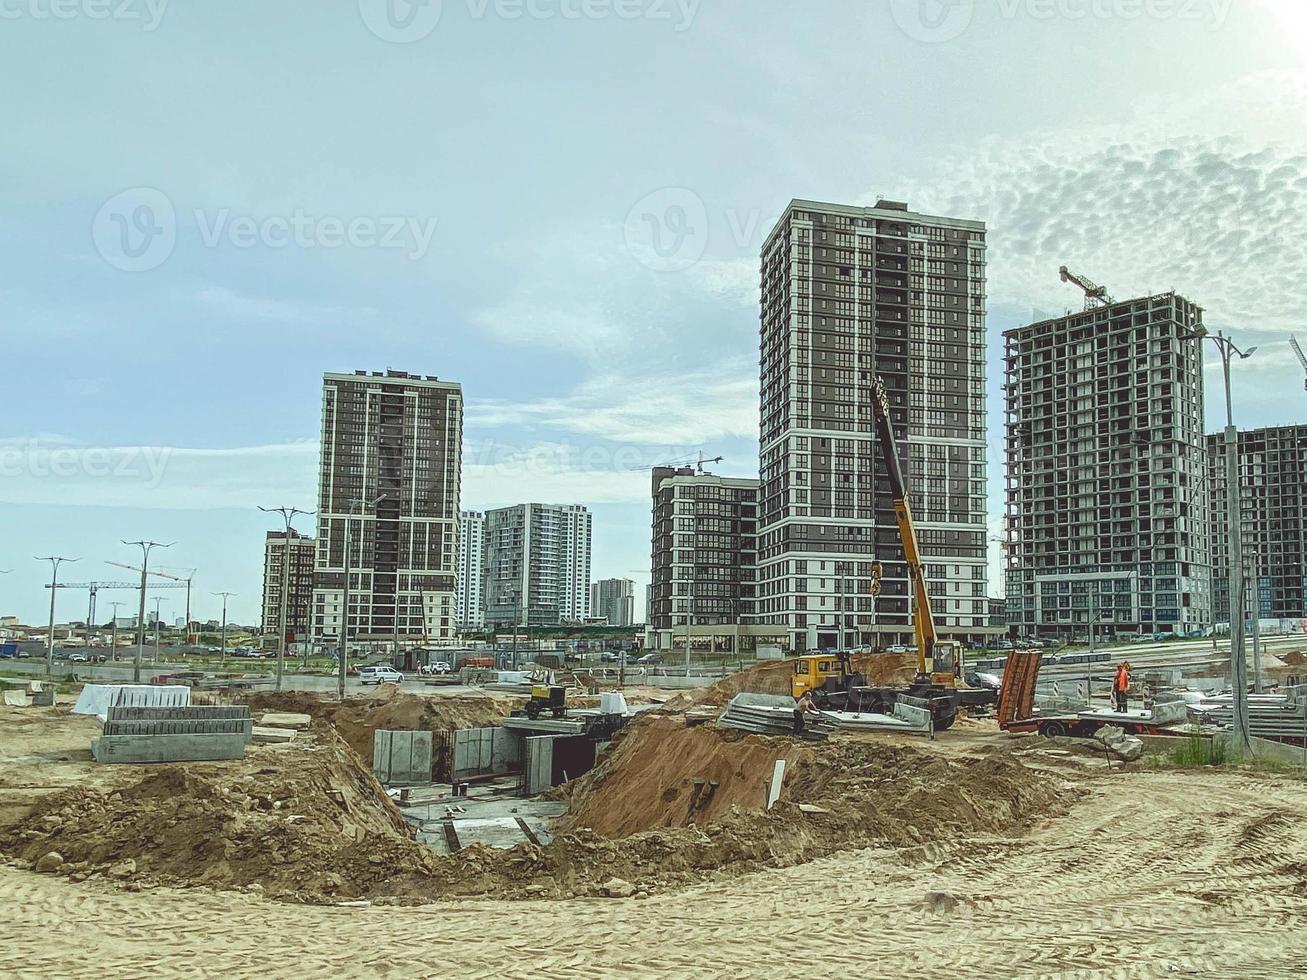 construction of a new neighborhood in the city. erection of high, multi-storey buildings made of concrete, glass, blocks. digging a foundation pit nearby photo